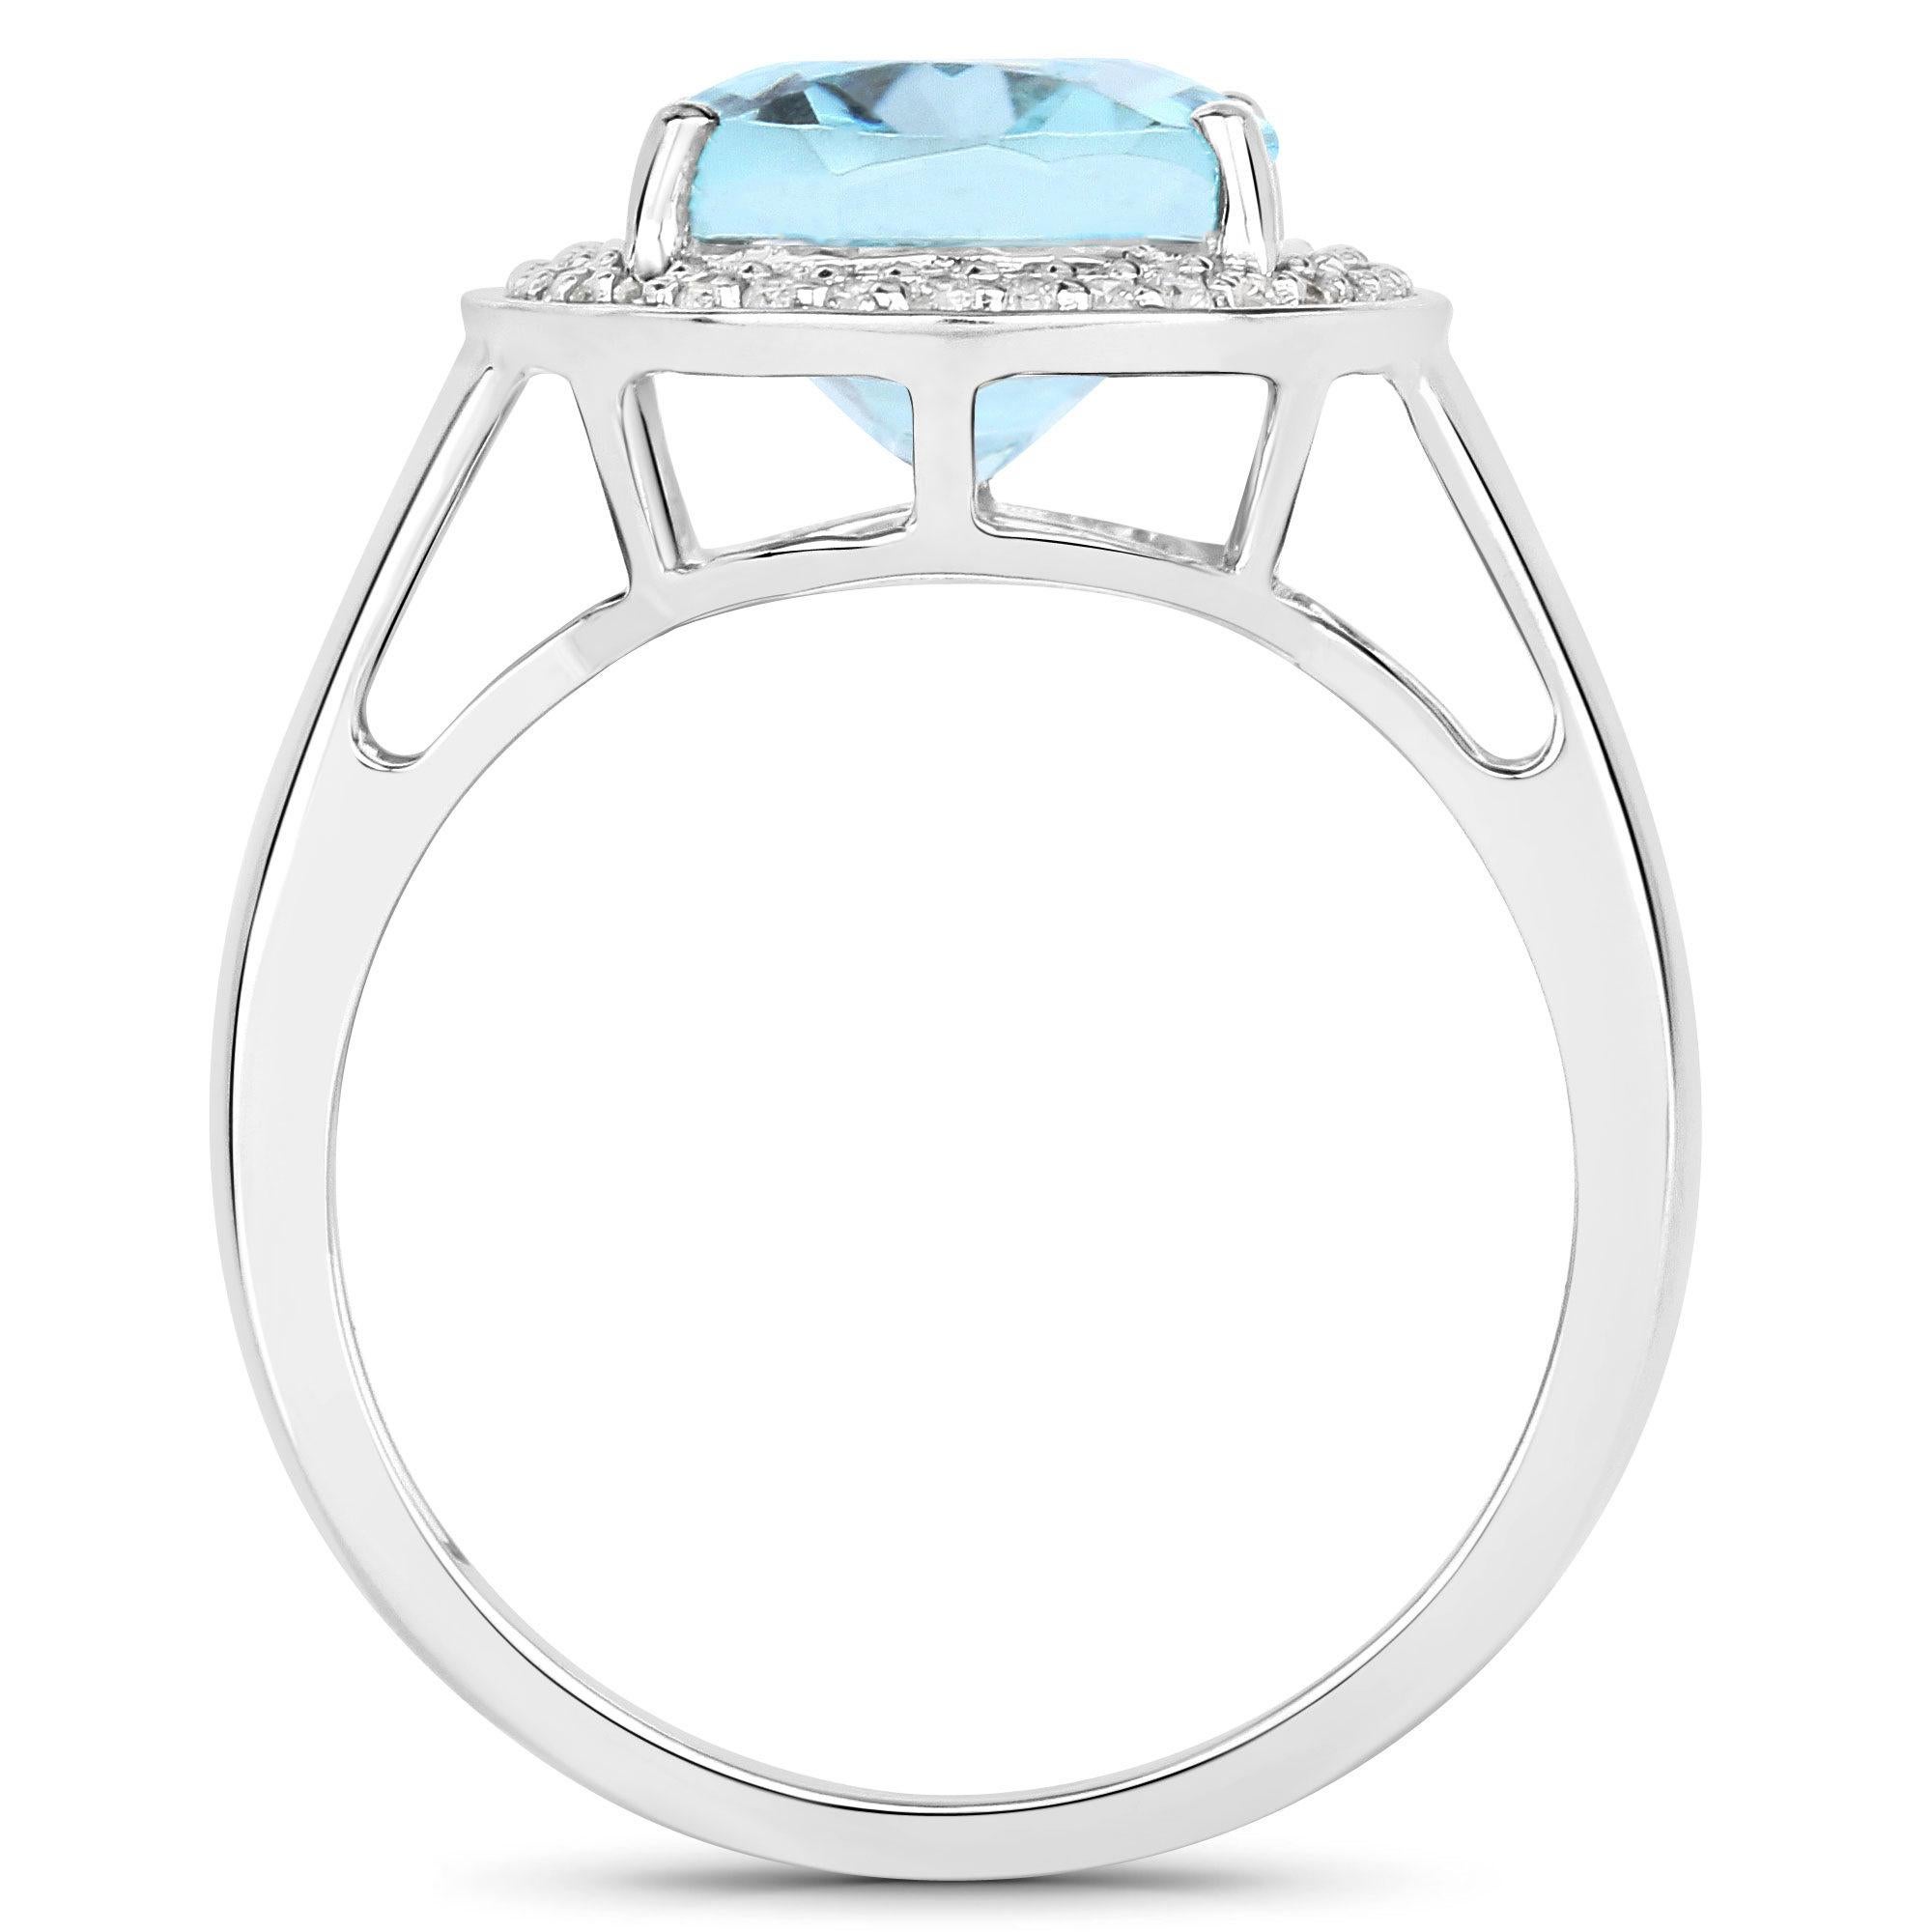 Natural Aquamarine Cocktail Ring Diamond Halo 3.70 Carats 14K White Gold In Excellent Condition For Sale In Laguna Niguel, CA